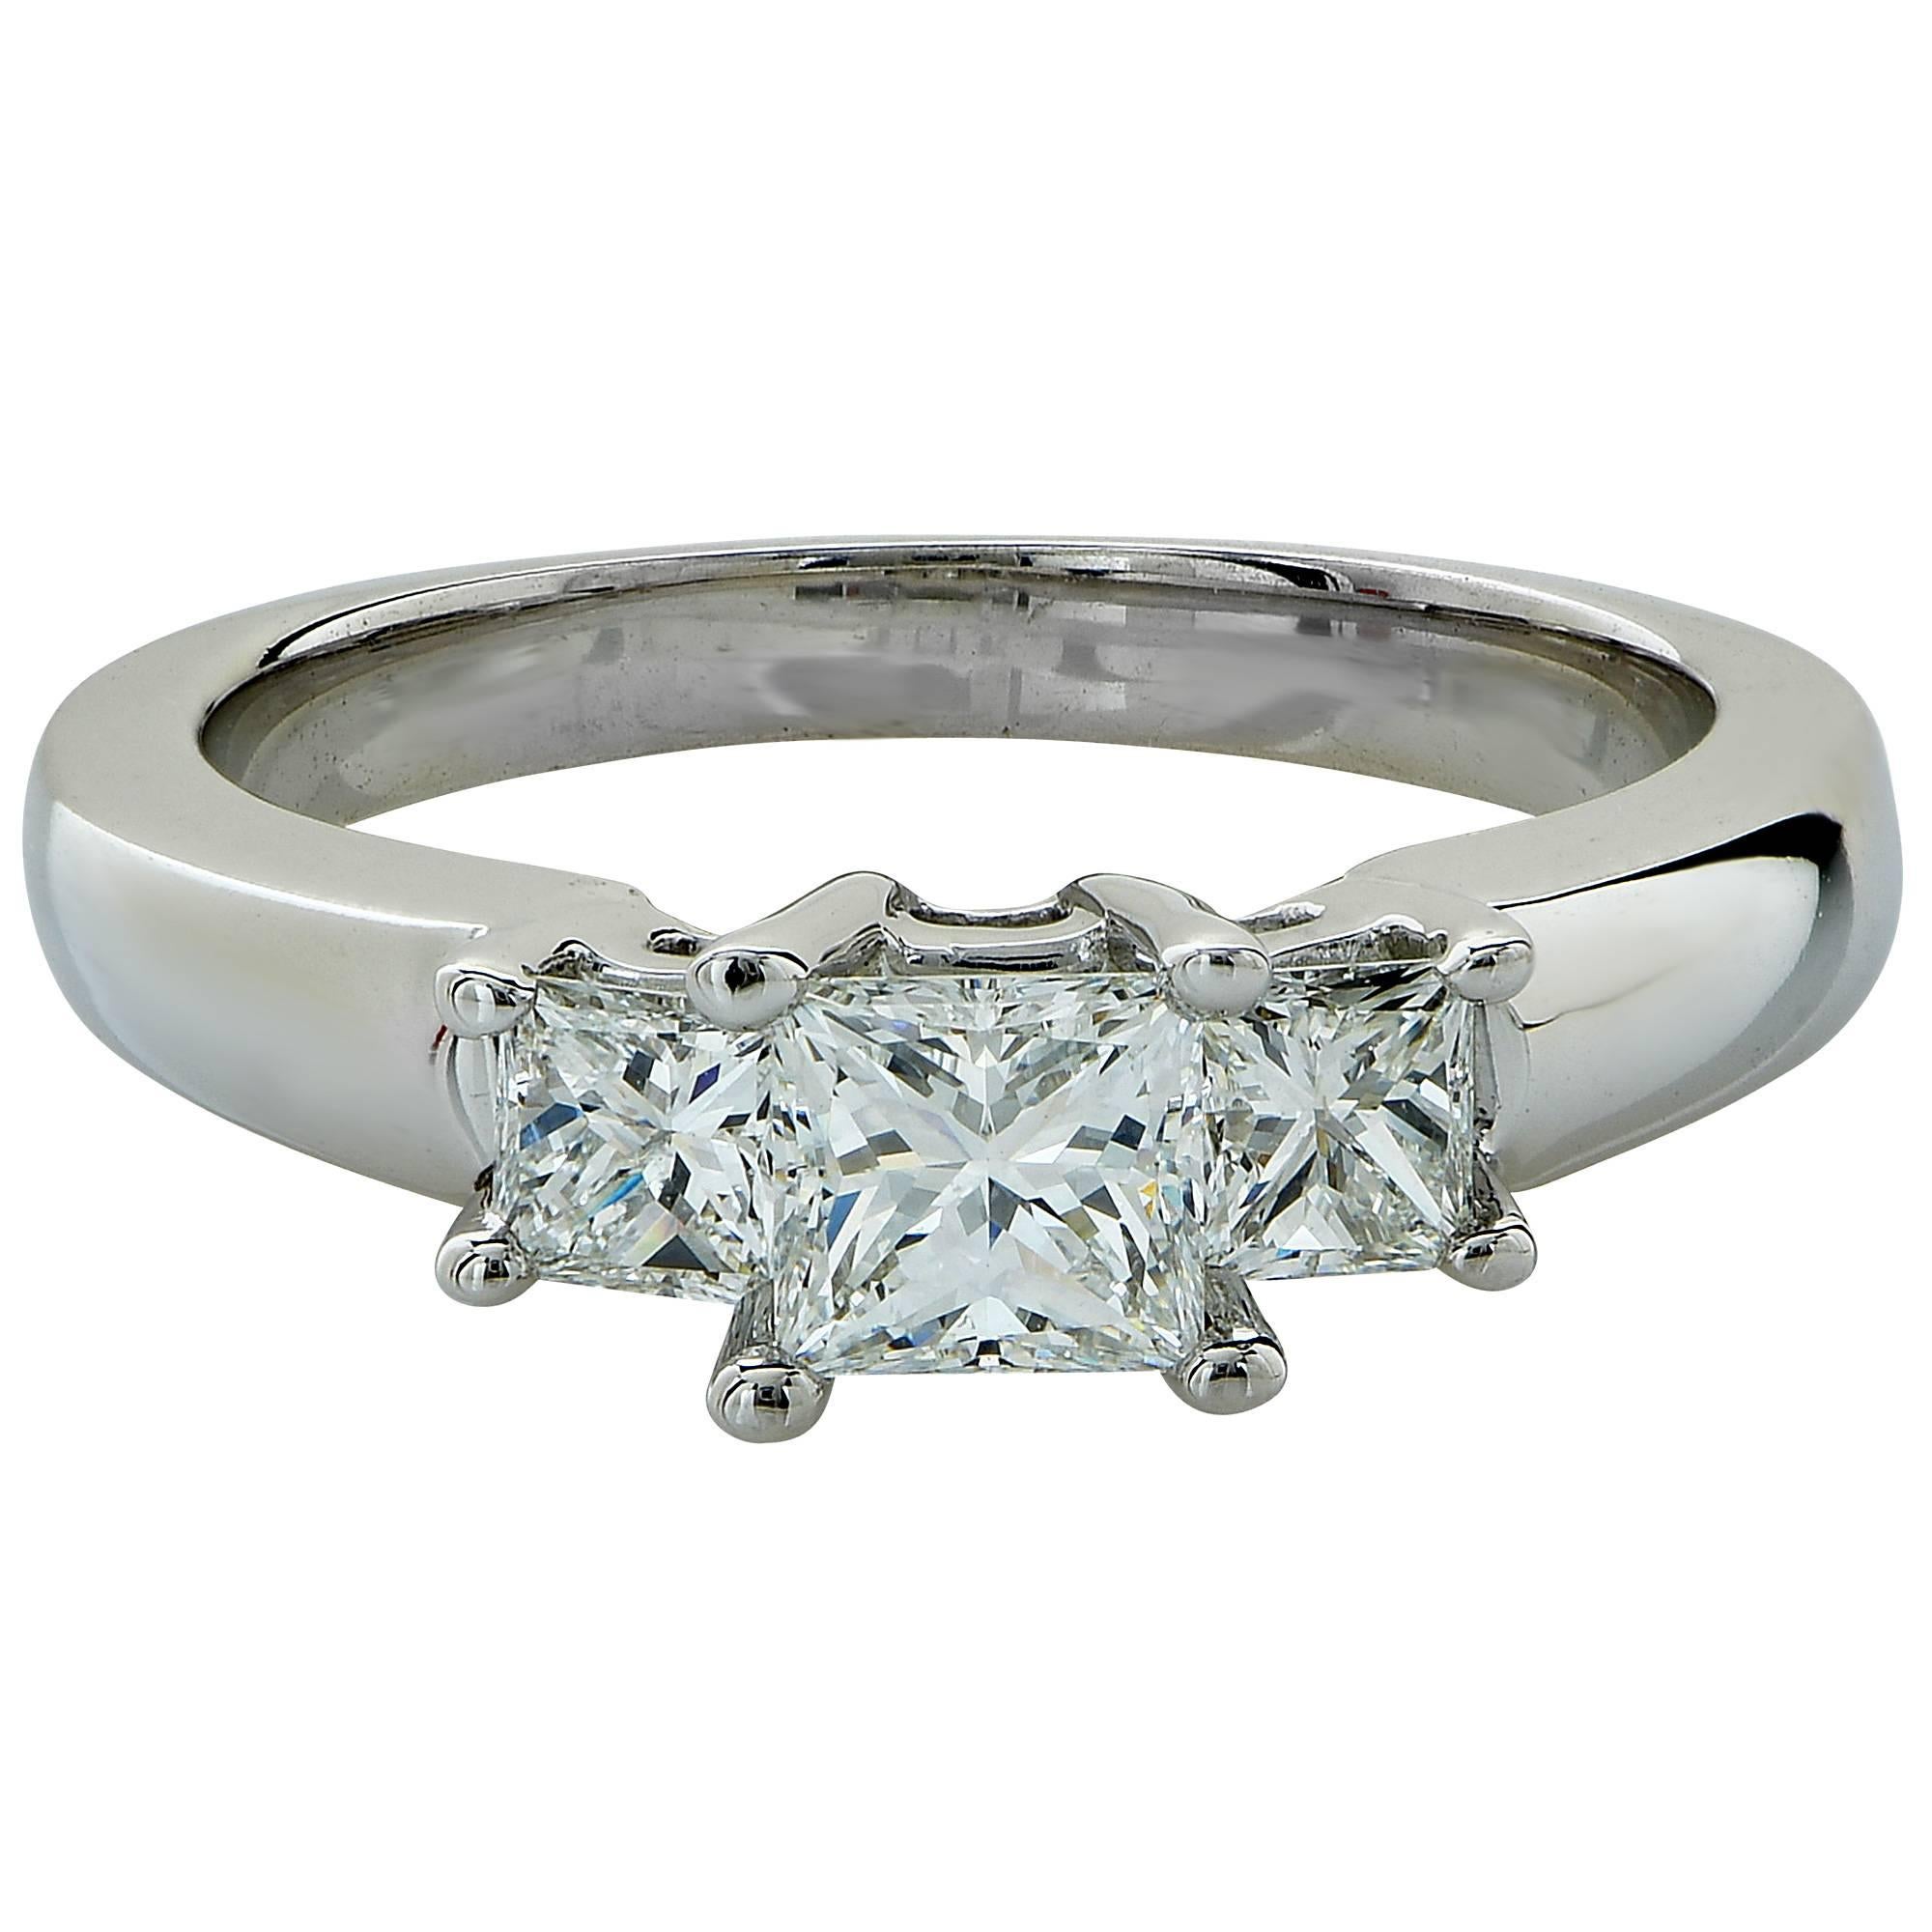 18k white gold birks ring featuring 3 princess cut diamonds weighing approximately 1.10cts total, F-G color, VS clarity.

Ring size: 6 (can be sized up or down free of charge)
Metal weight: 8.00 grams

This diamond ring is accompanied by a